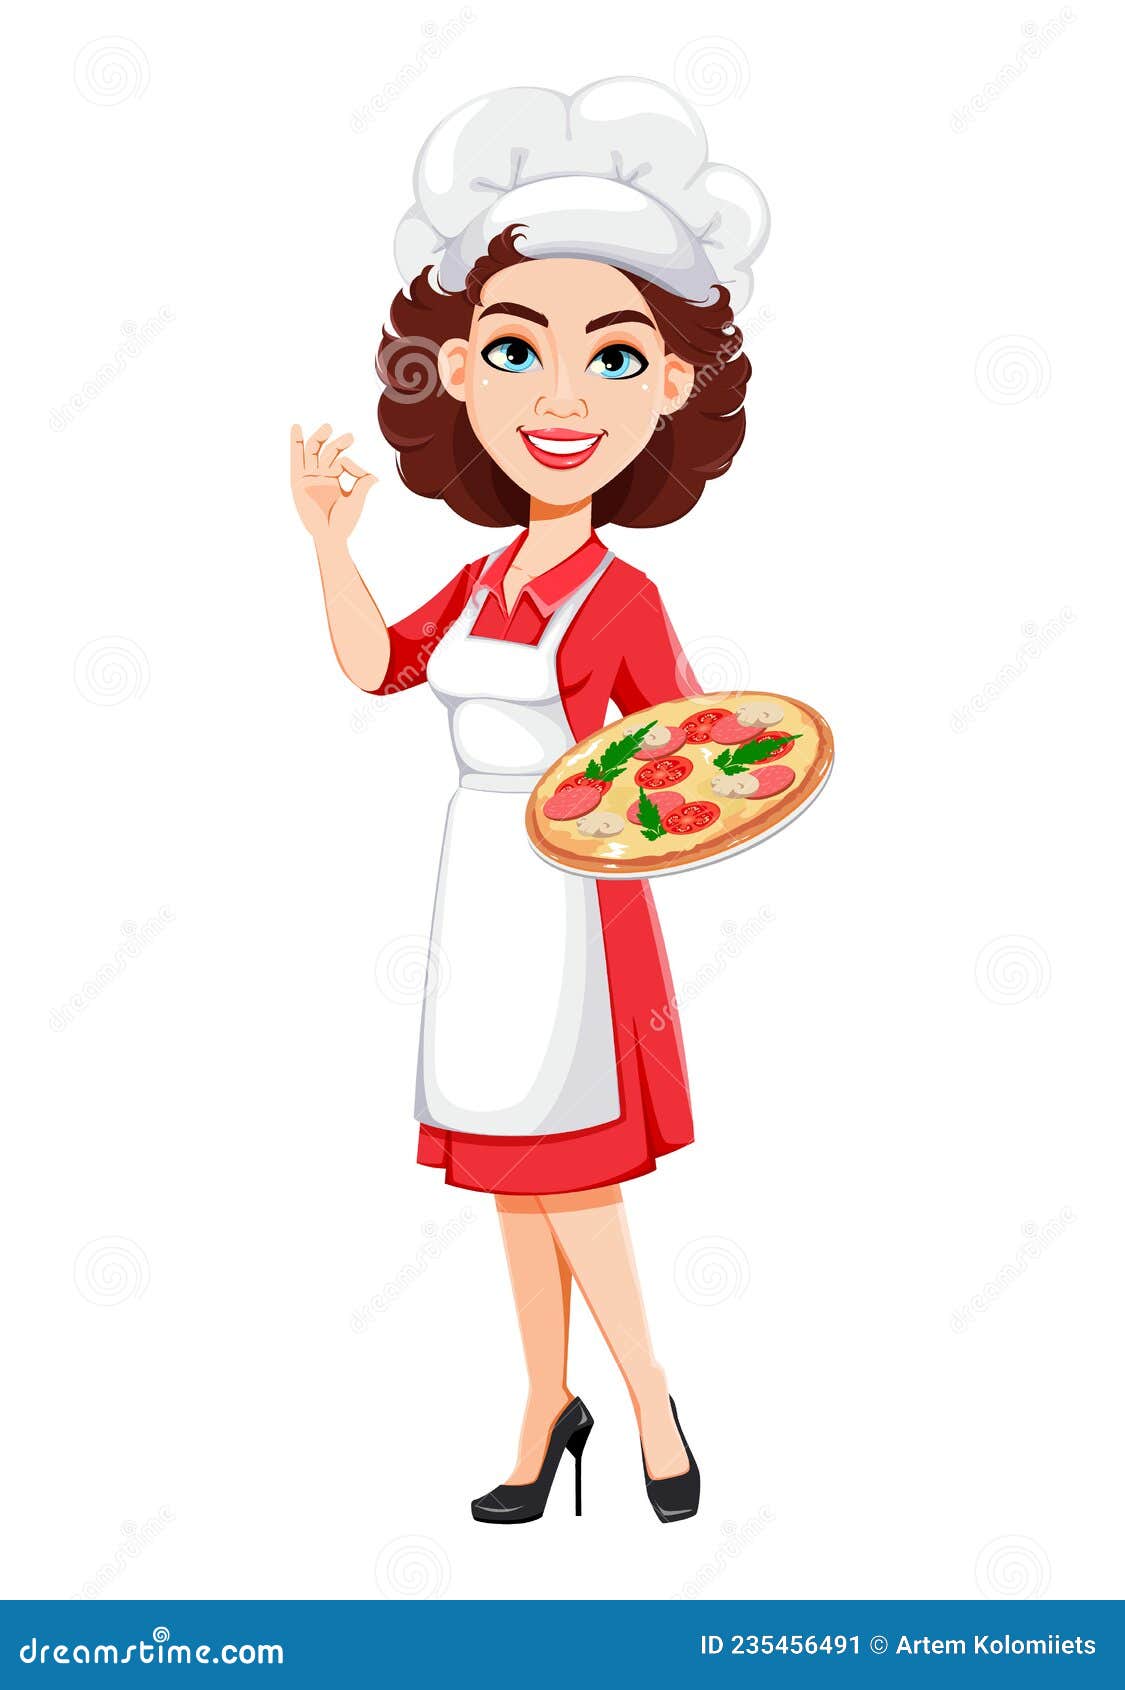 Chef Woman Holding Pizza. Cook Lady Stock Vector - Illustration of girl ...